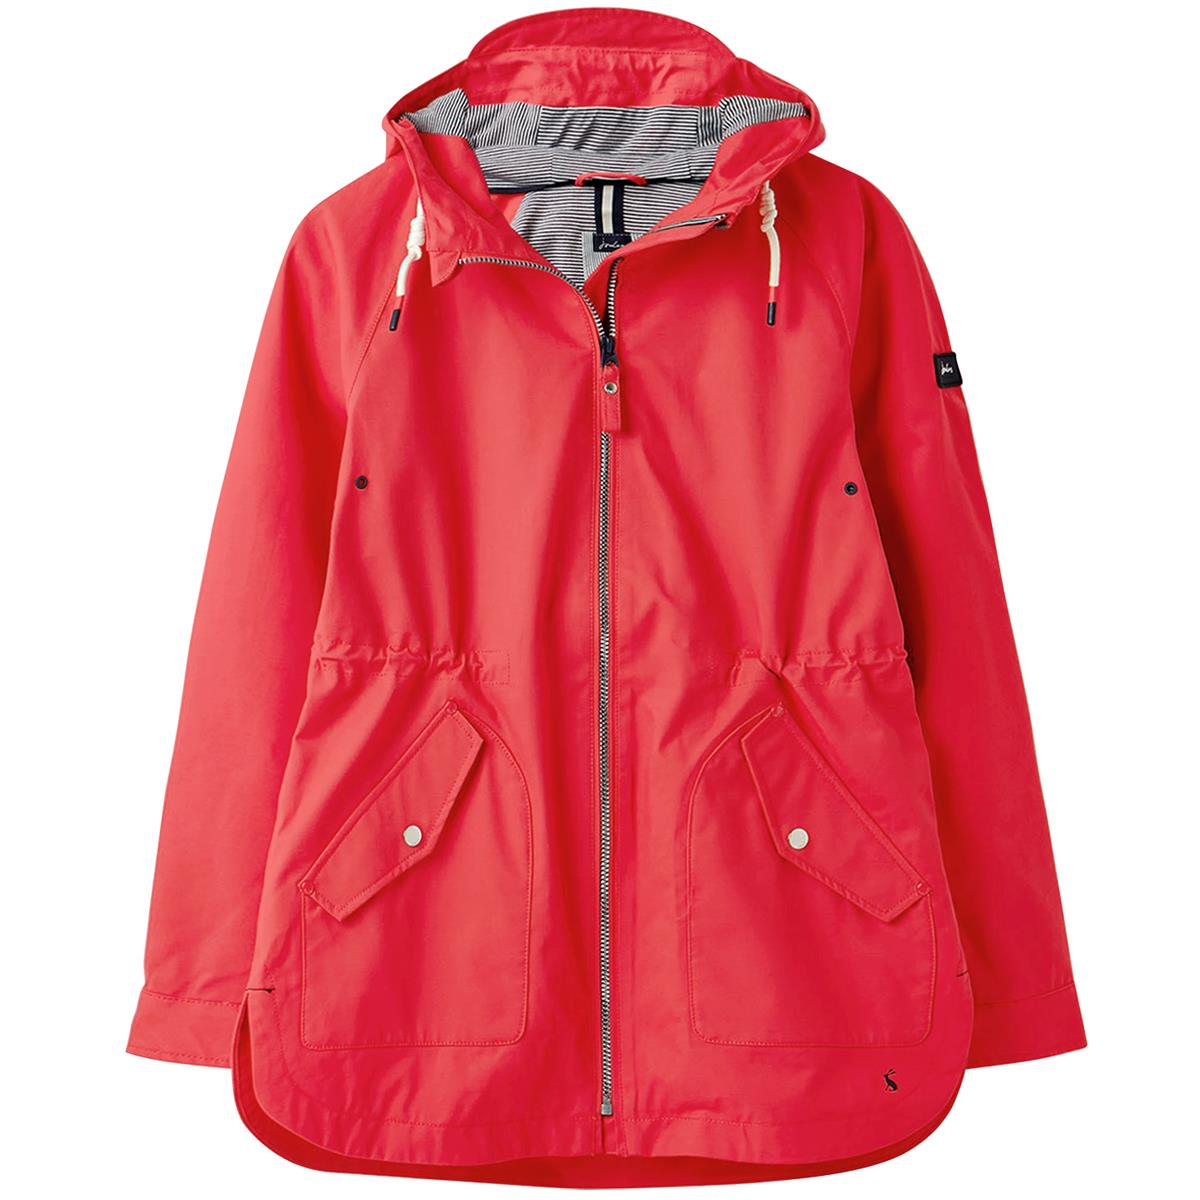 What materials are used in the Joules Shoreside Coastal Waterproof Jacket?